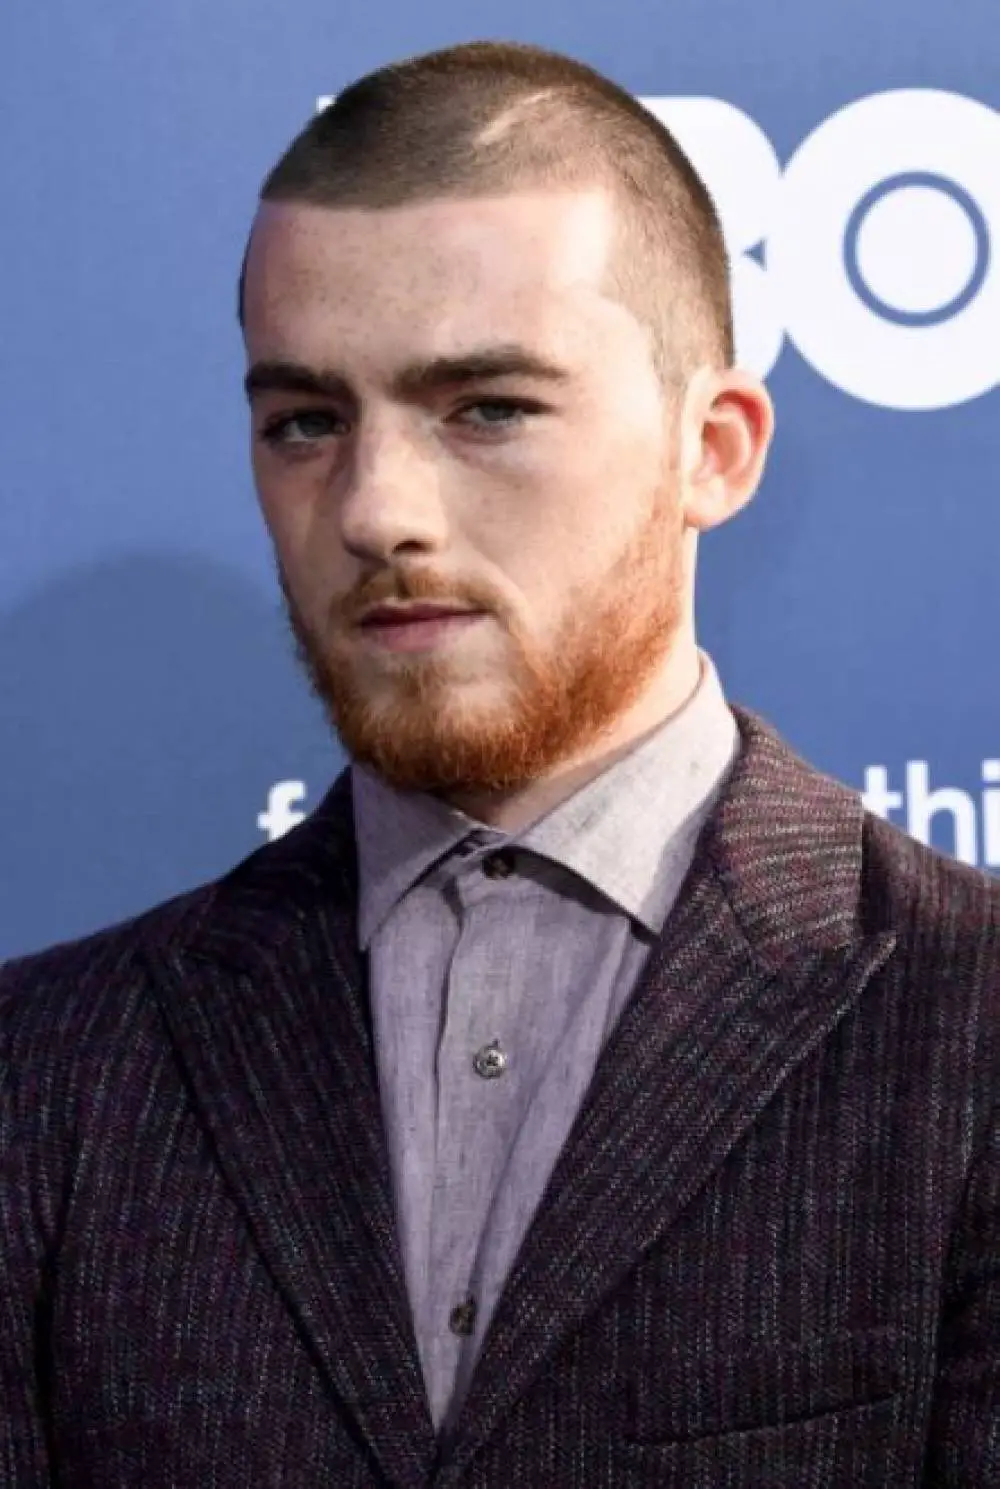 Is Euphoria's Star Angus Cloud Related To Mac Miller? 